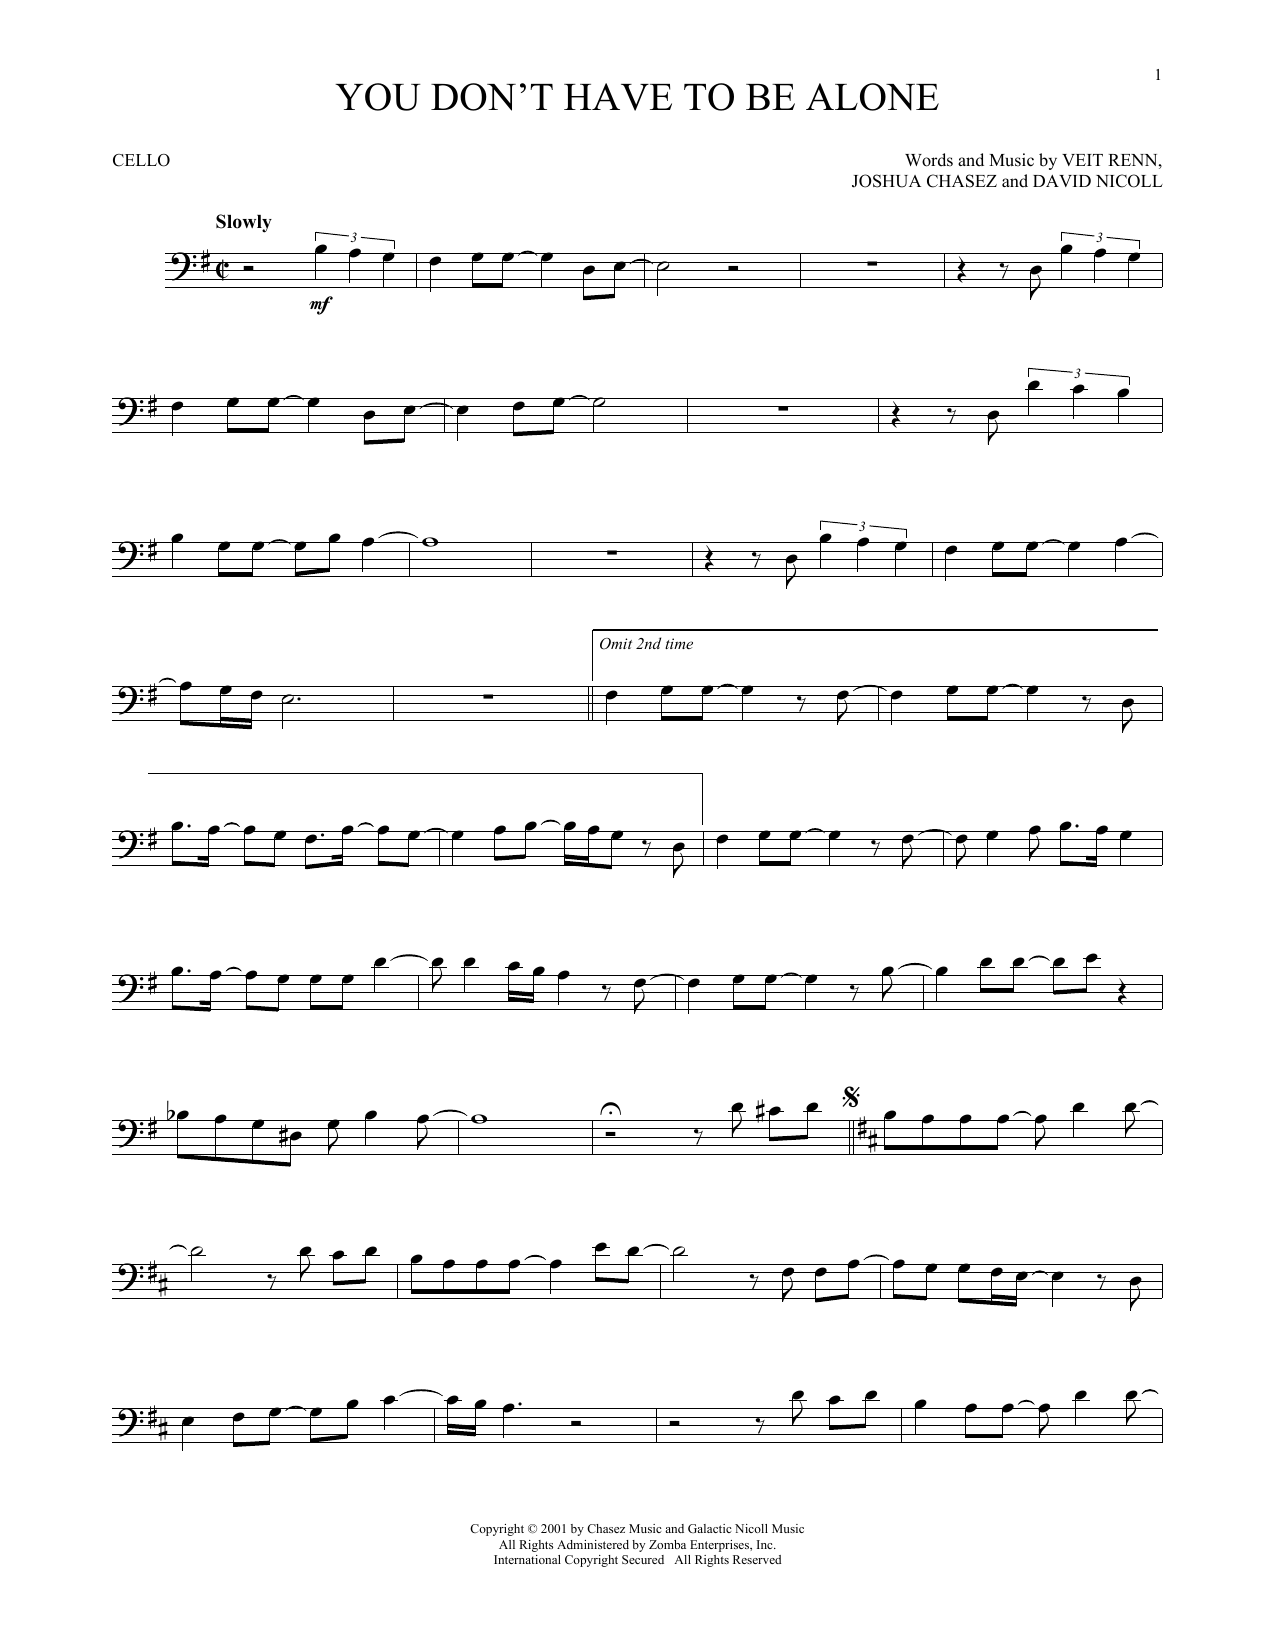 Download NSYNC You Don't Have To Be Alone Sheet Music